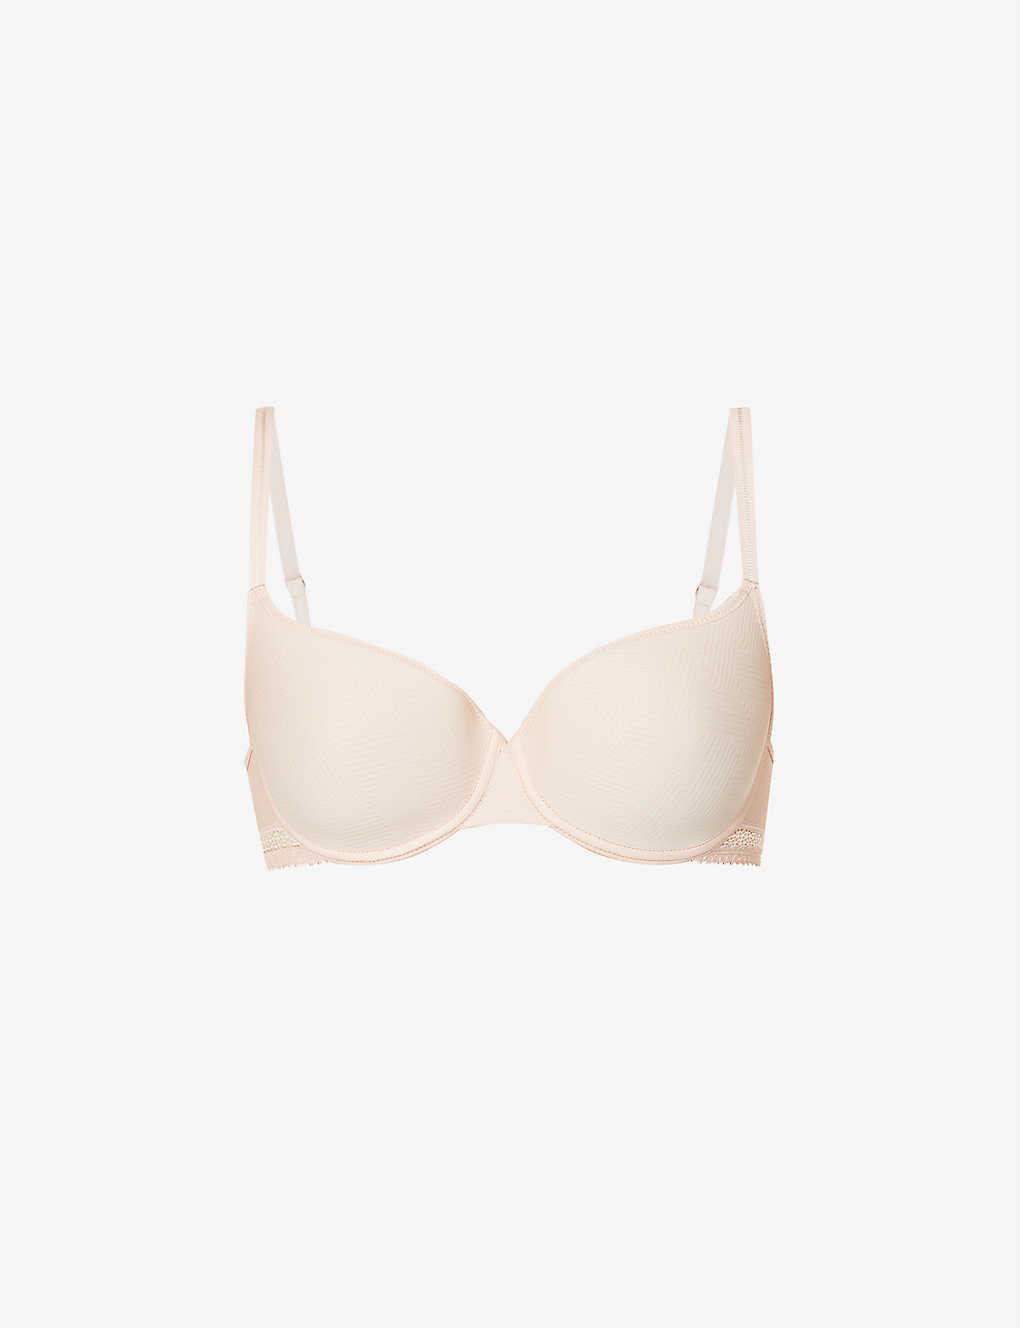 Passionata Dream Today Stretch-woven T-shirt Bra In Nude (lingerie)